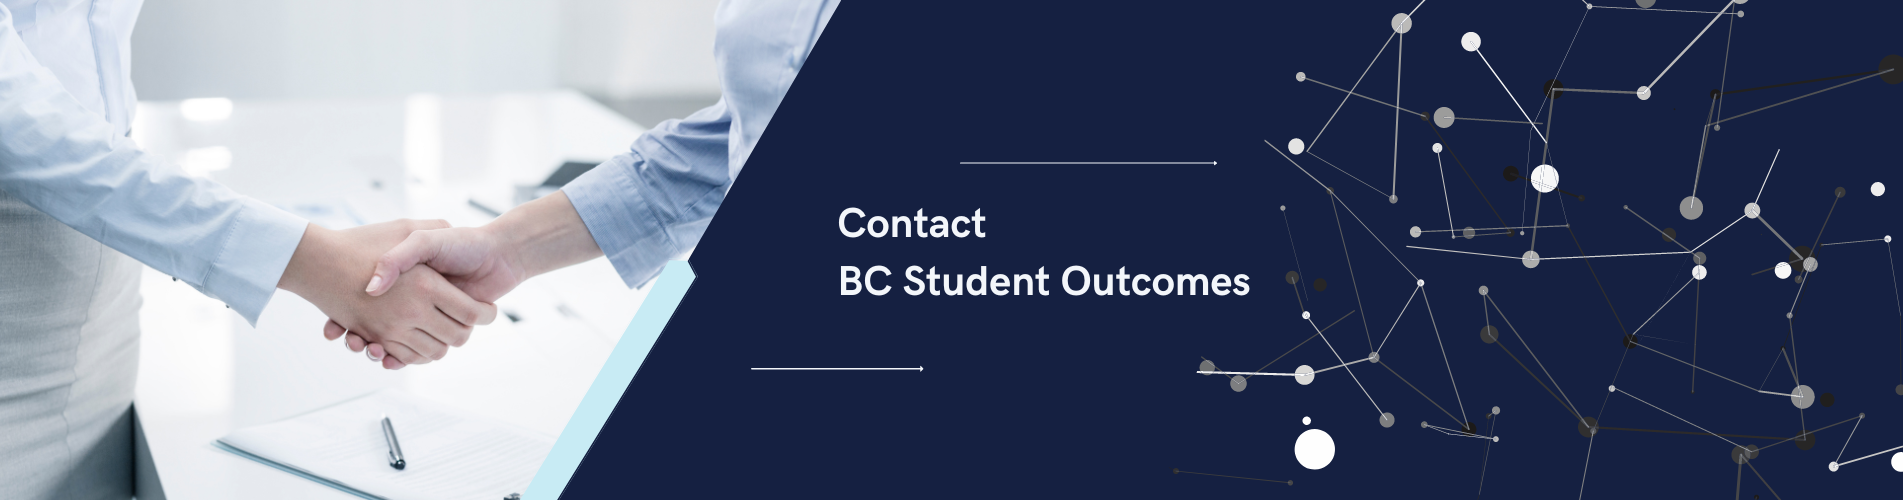 Banner text reads: Contact B.C. Student Outcomes.